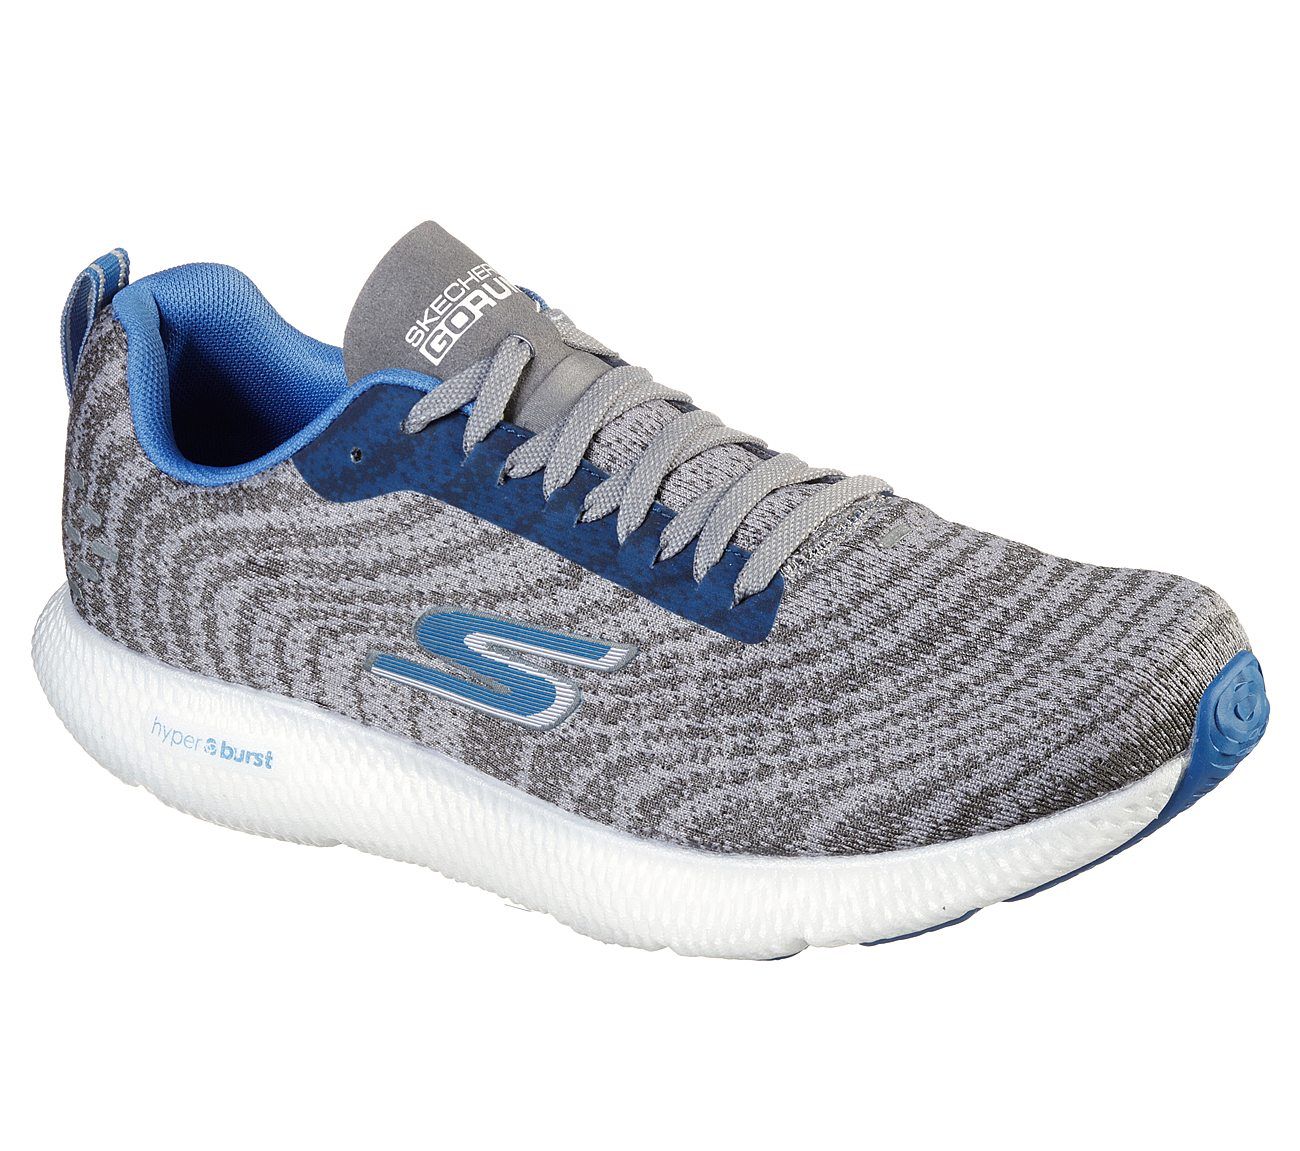 do skechers run small or large